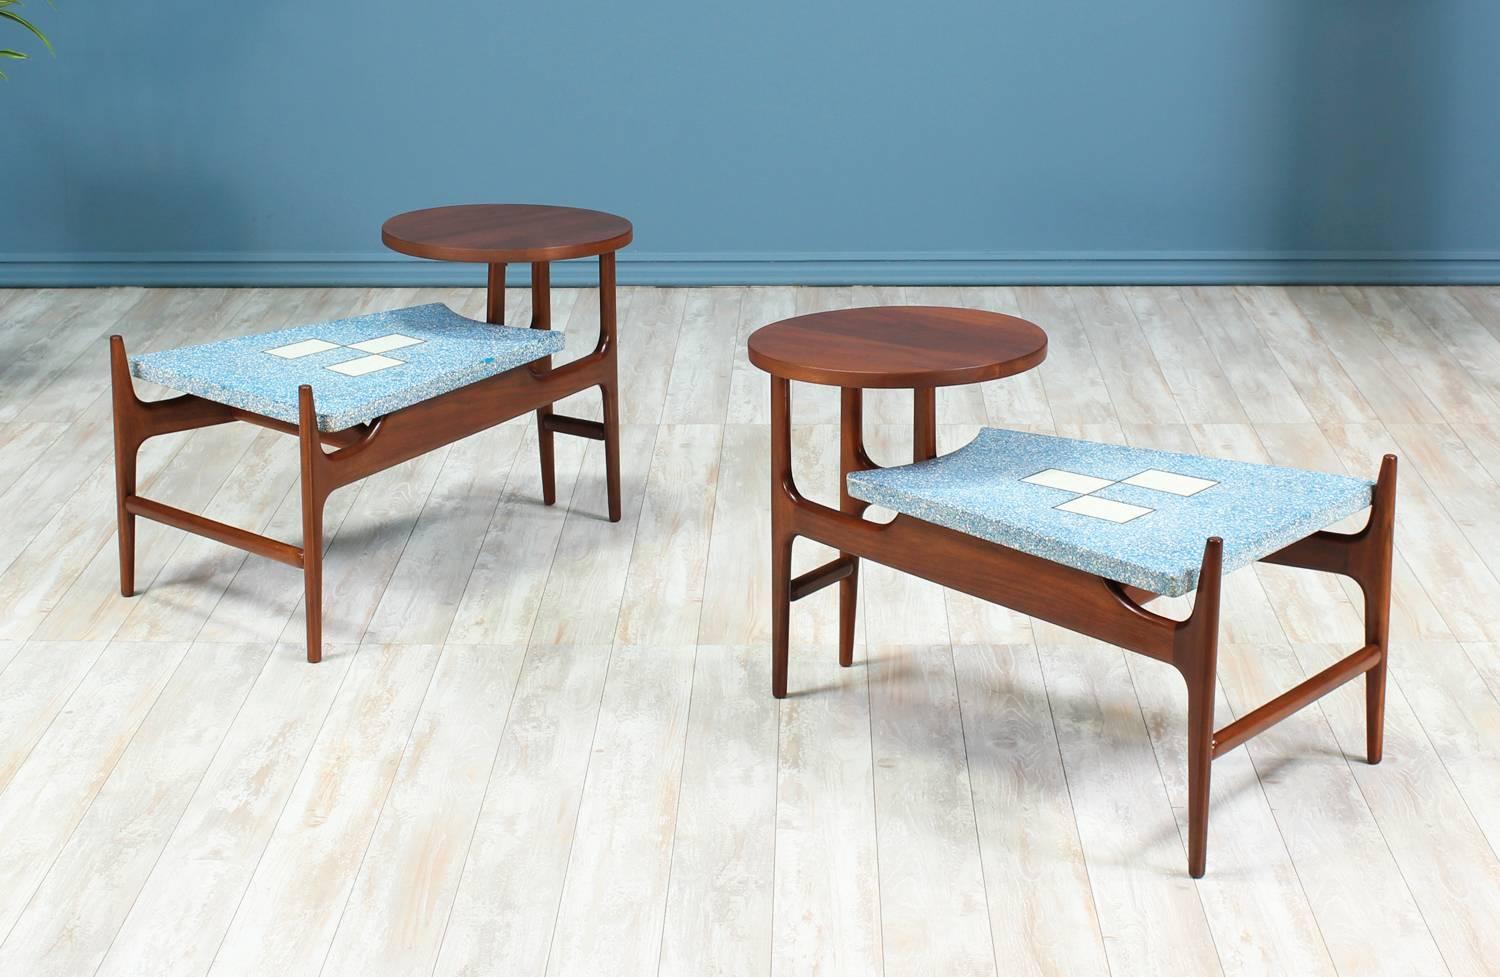 Add a twist of fun and elegance with these fascinating blue terrazzo floating-top side tables designed by Harvey Probber in the United States circa 1950’s. This unique design features a walnut wood frame and a stunning blue terrazzo tile top with